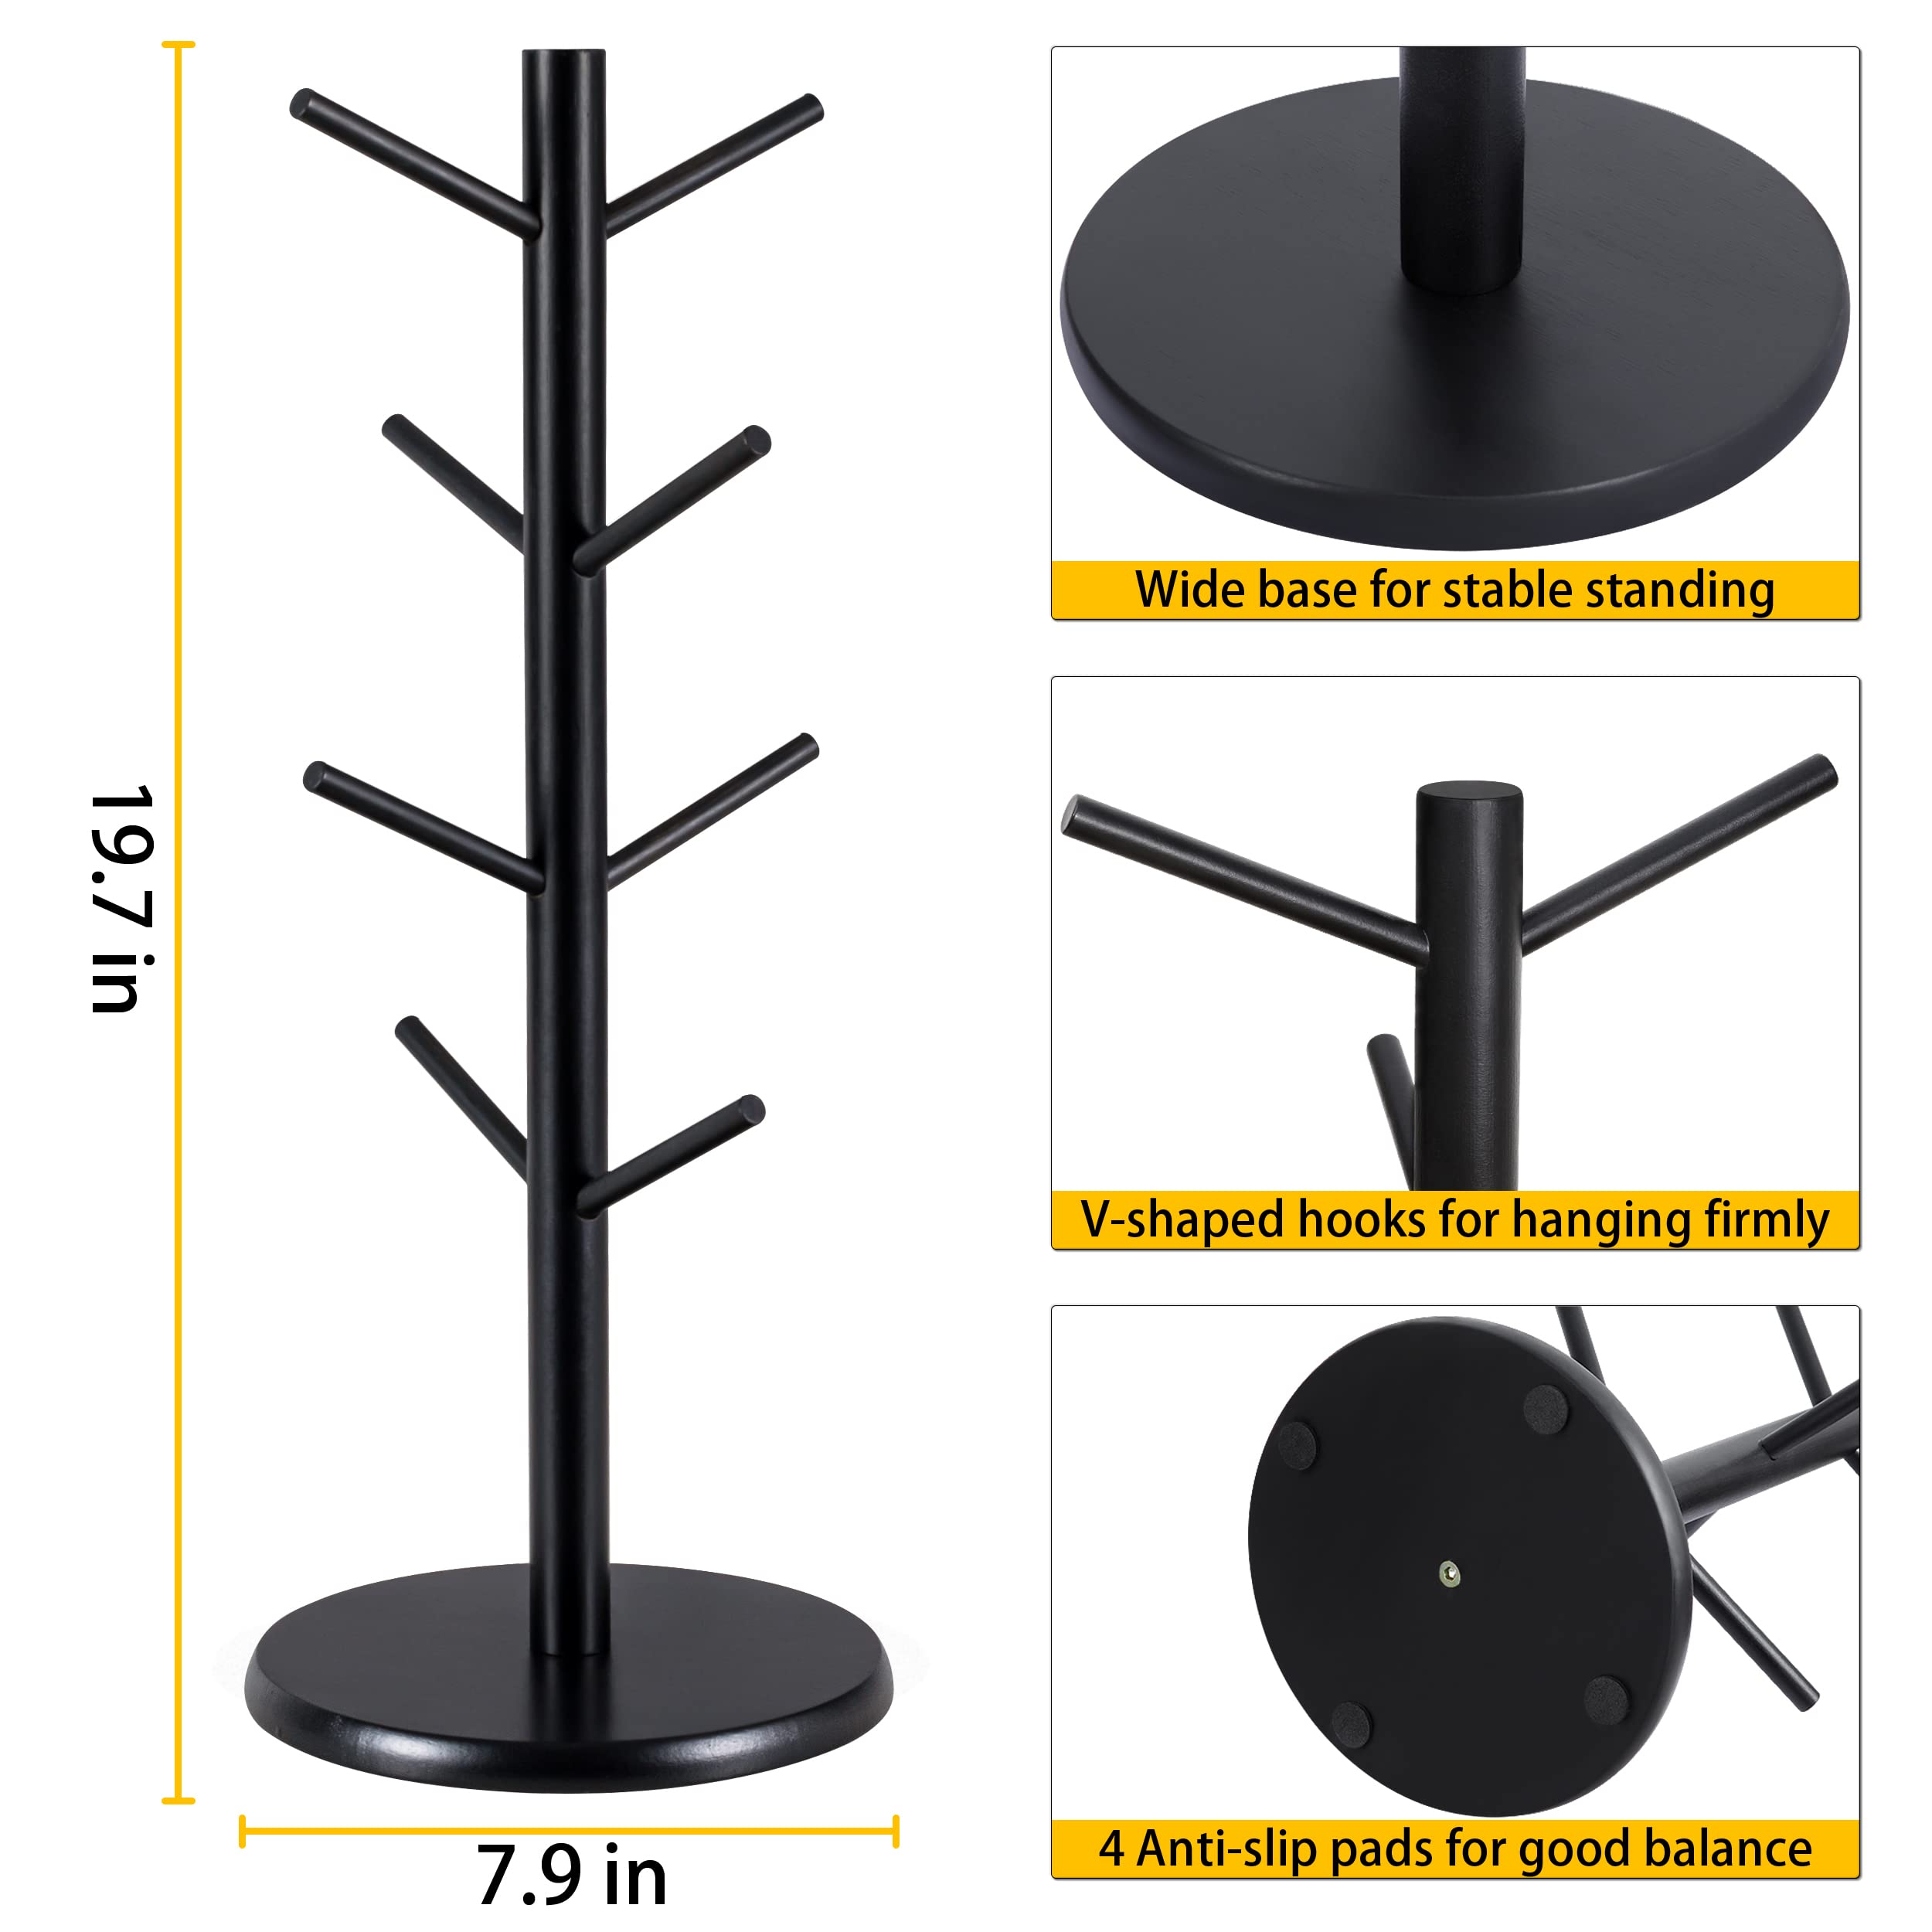 MyLifeUNIT Mug Holder Tree, Black Coffee Cup Holder with 8 Hooks, Wood Mug Hanger Stand for Counter